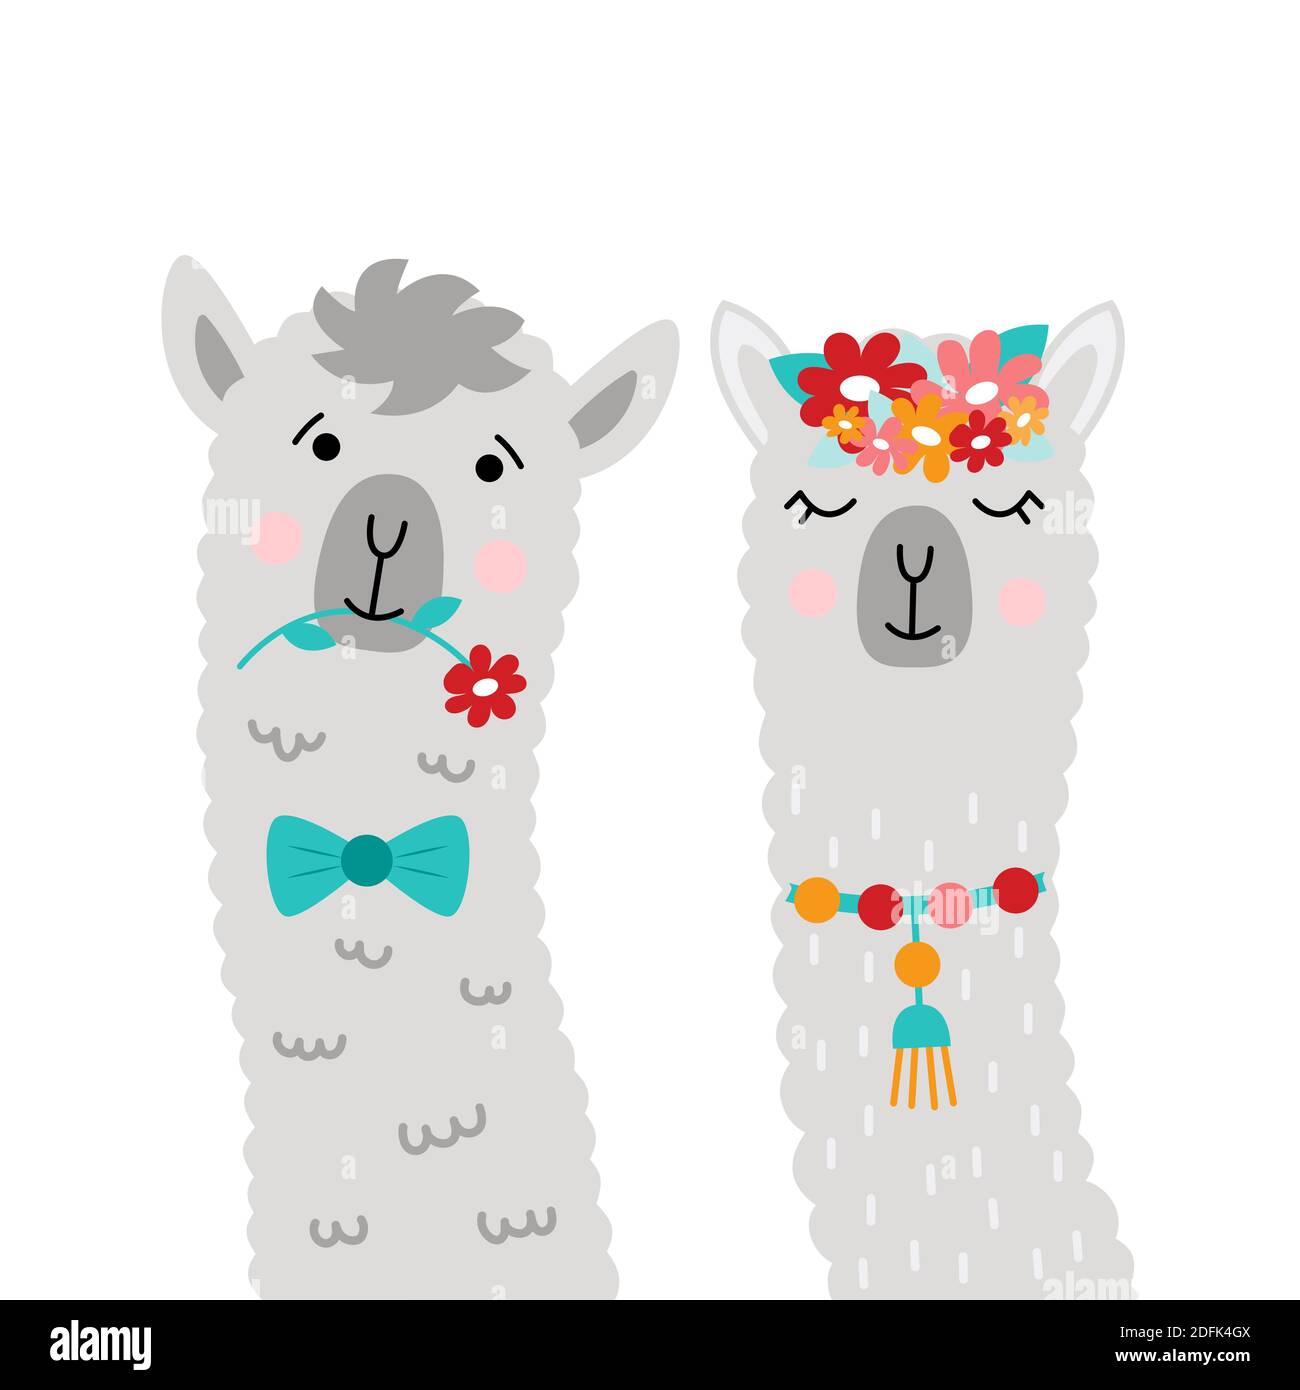 Couple llamas newlyweds. Pretty Alpaca. Vector illustration with llama faces for poster, postcard, t-shirt, sticker, etc. Stock Vector